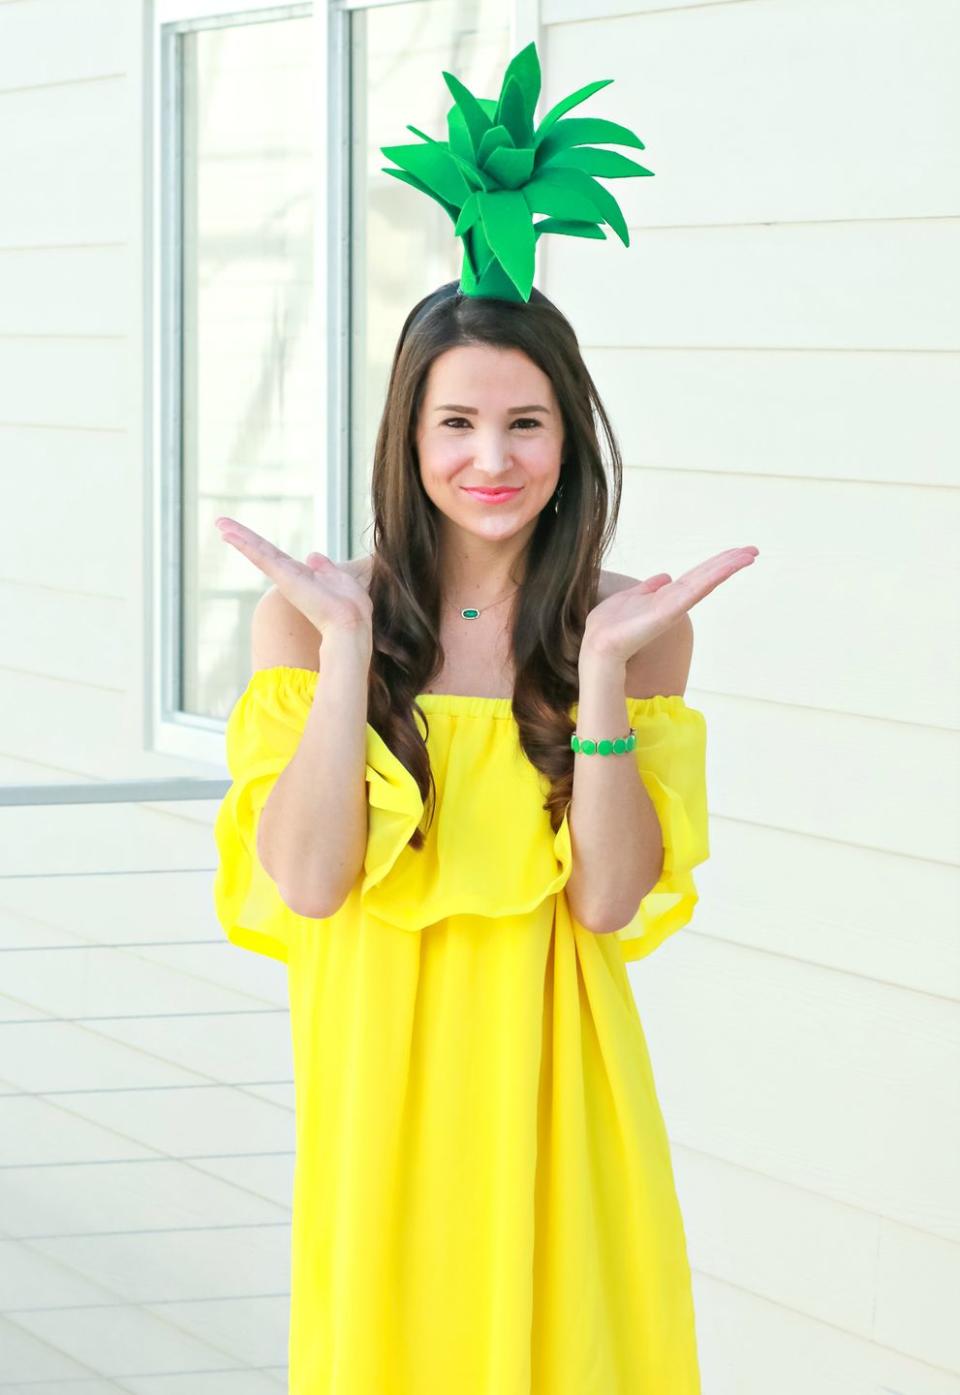 <p>Make this budget-friendly outfit the pineapple of your eye on October 31. </p><p><strong>Get the tutorial at <a href="https://thediaryofadebutante.com/diy-pineapple-costume/" rel="nofollow noopener" target="_blank" data-ylk="slk:Diary of a Debutante" class="link ">Diary of a Debutante</a>. </strong></p><p><strong><a class="link " href="https://www.amazon.com/Emerald-Green-Acrylic-Craft-Felt/dp/B001AQ9H98/?tag=syn-yahoo-20&ascsubtag=%5Bartid%7C2089.g.41450396%5Bsrc%7Cyahoo-us" rel="nofollow noopener" target="_blank" data-ylk="slk:SHOP GREEN FELT">SHOP GREEN FELT</a><br></strong></p>